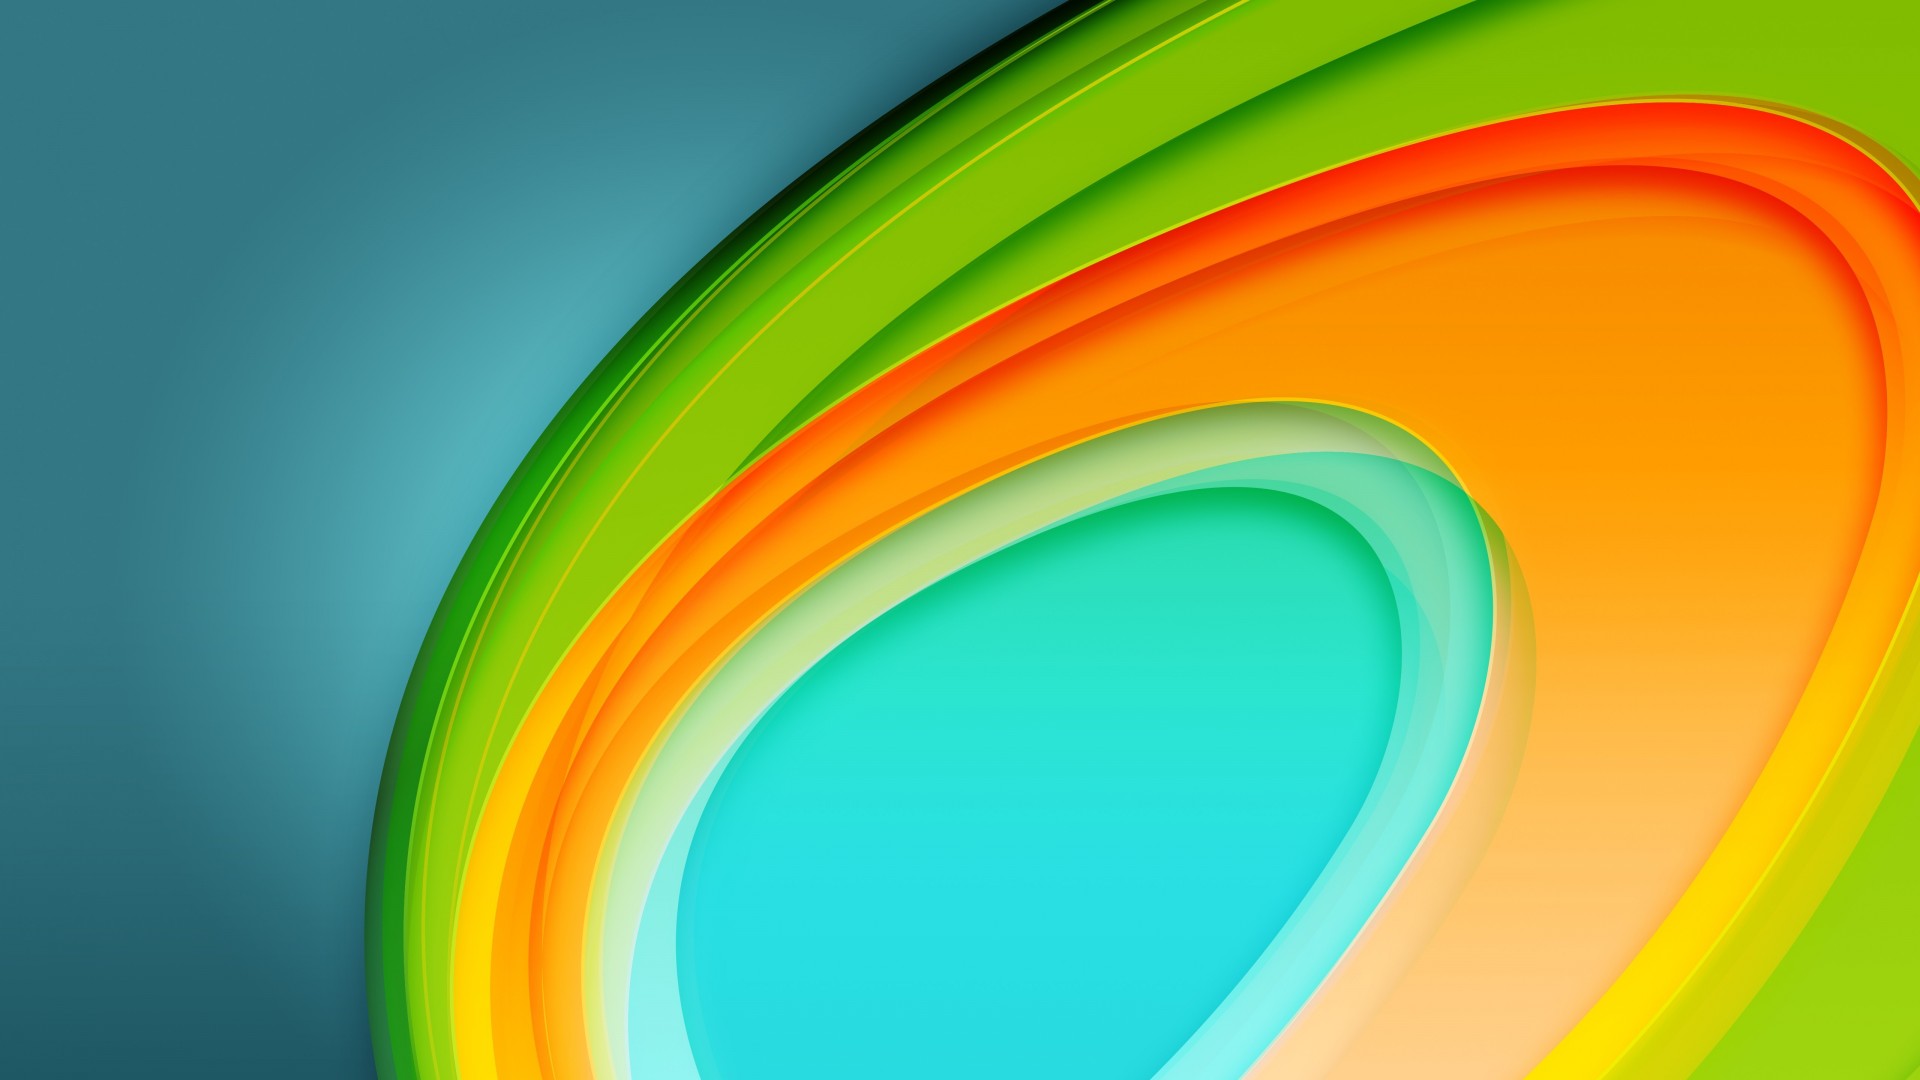 abstract background wallpaper,green,yellow,orange,blue,colorfulness